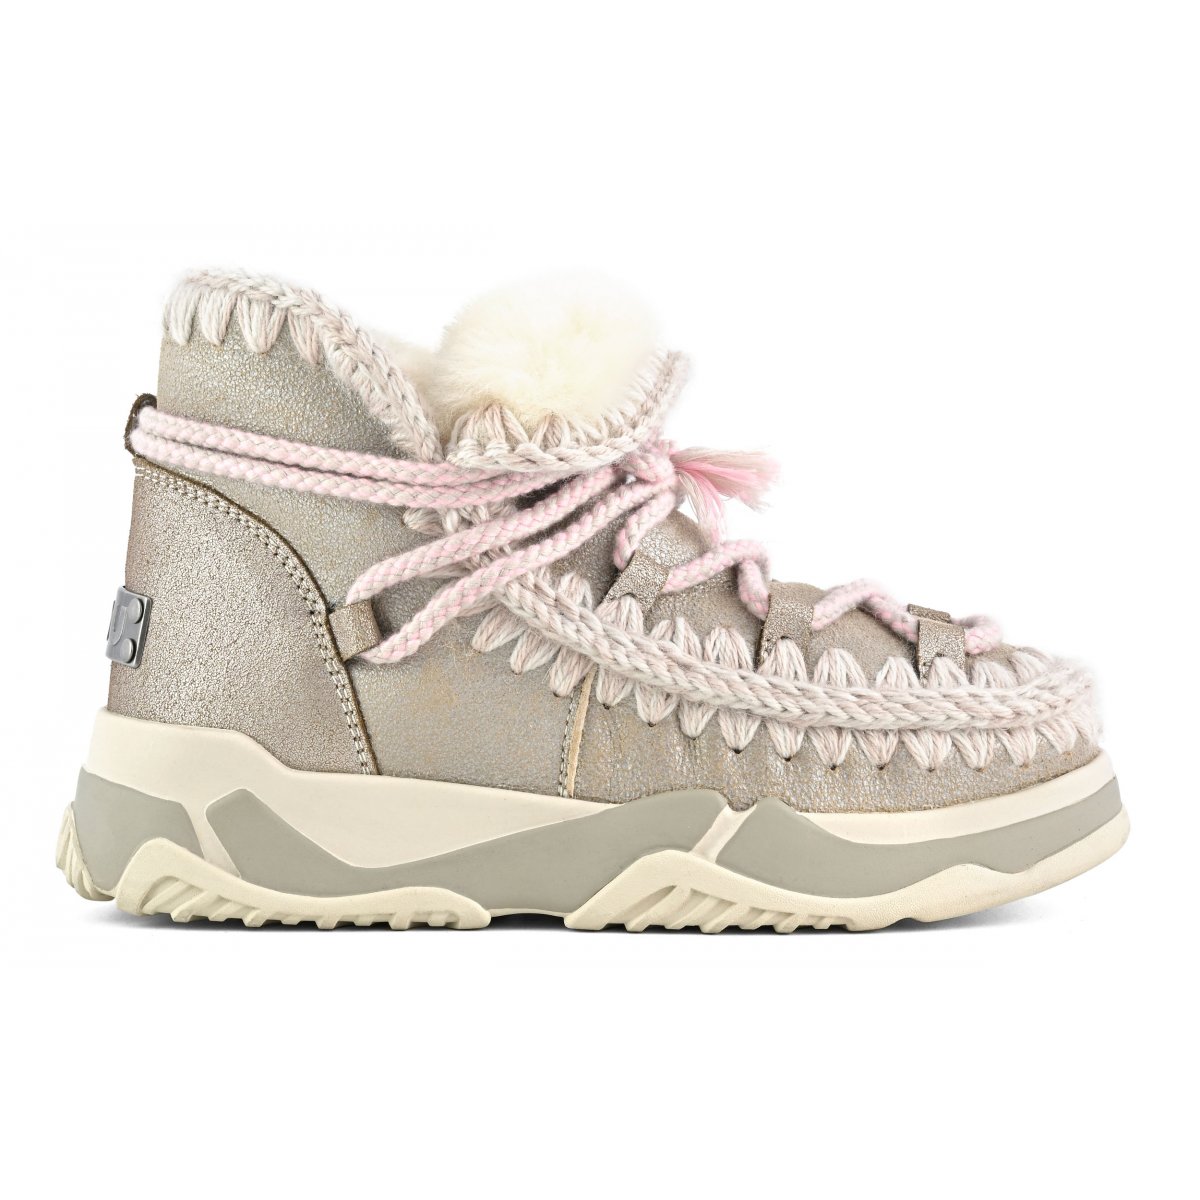 Scoubidou lace trainer STME img 1